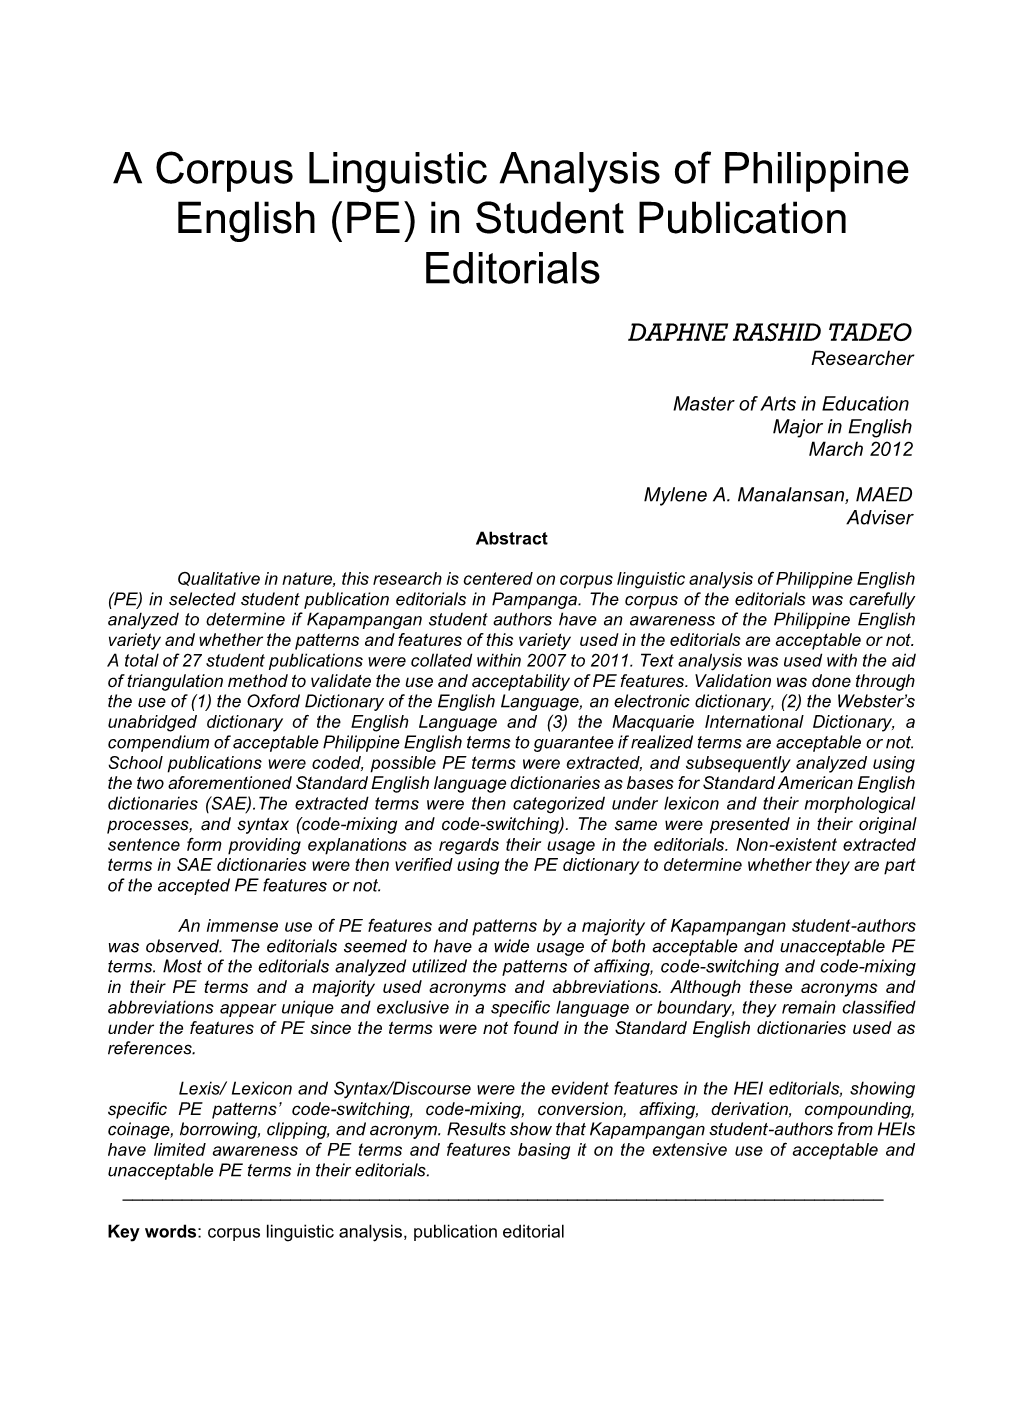 A Corpus Linguistic Analysis of Philippine English (PE) in Student Publication Editorials